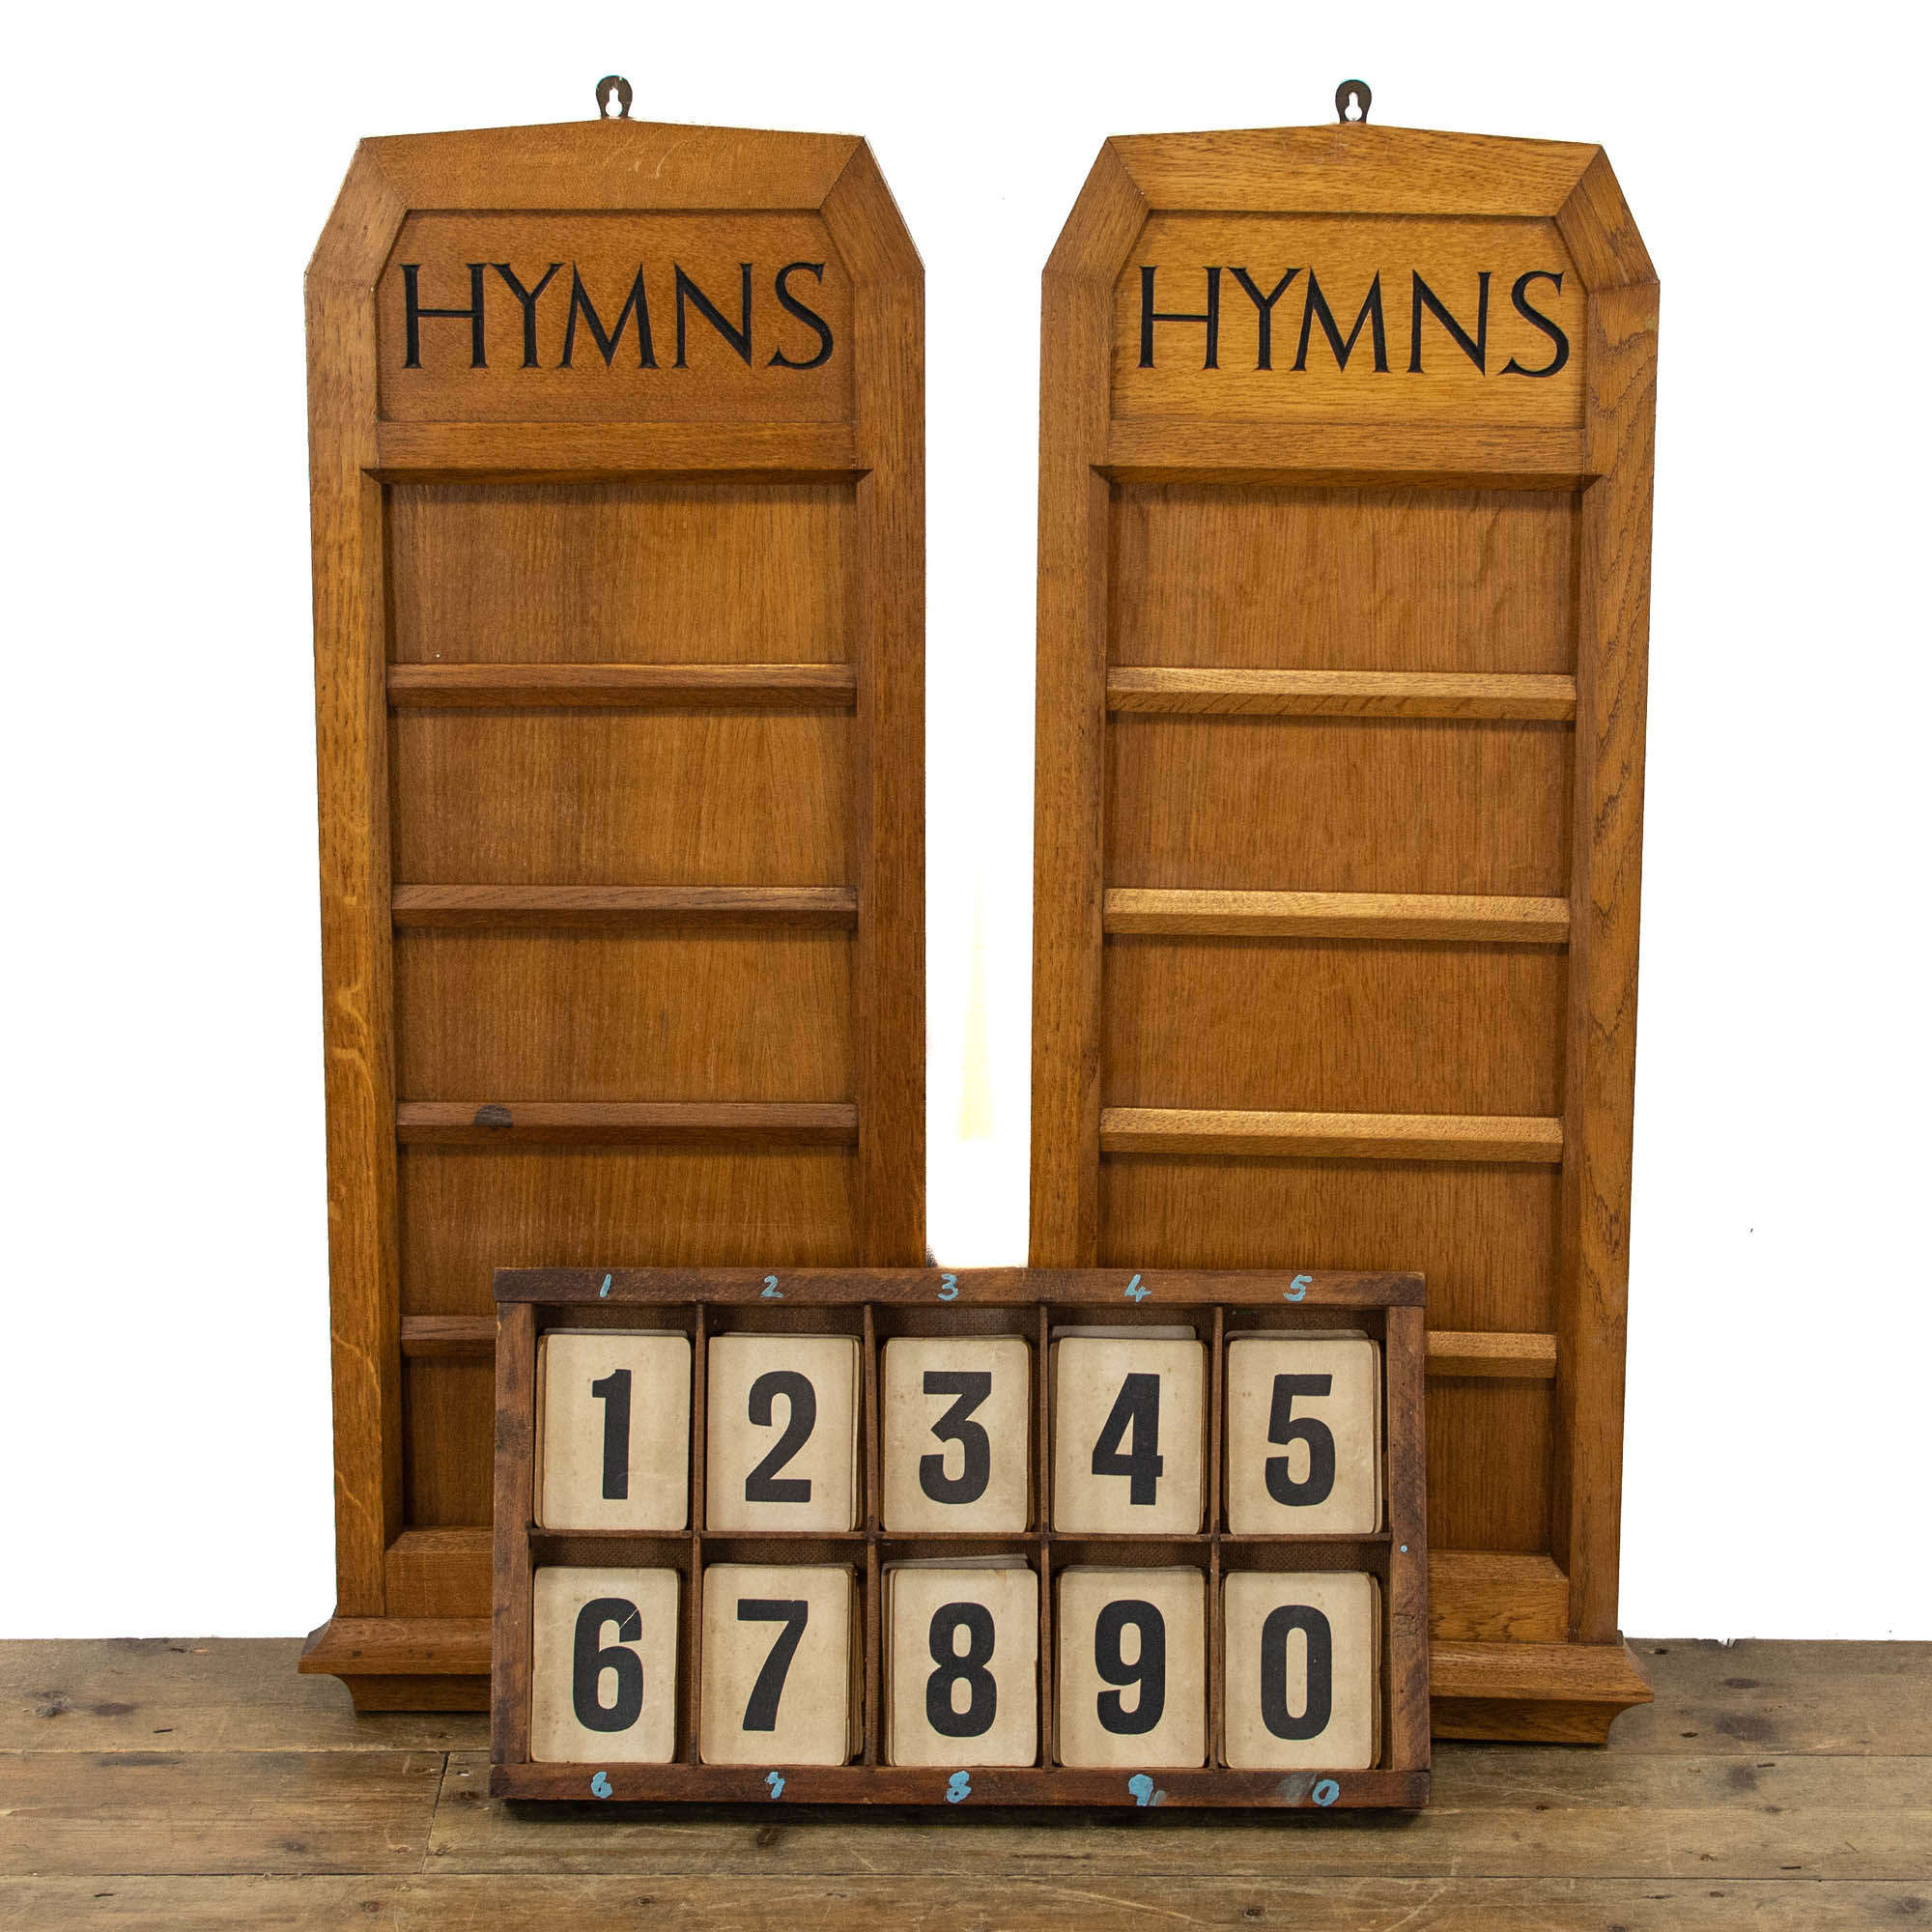 Pair Of Oak Hymn Boards With Numbers